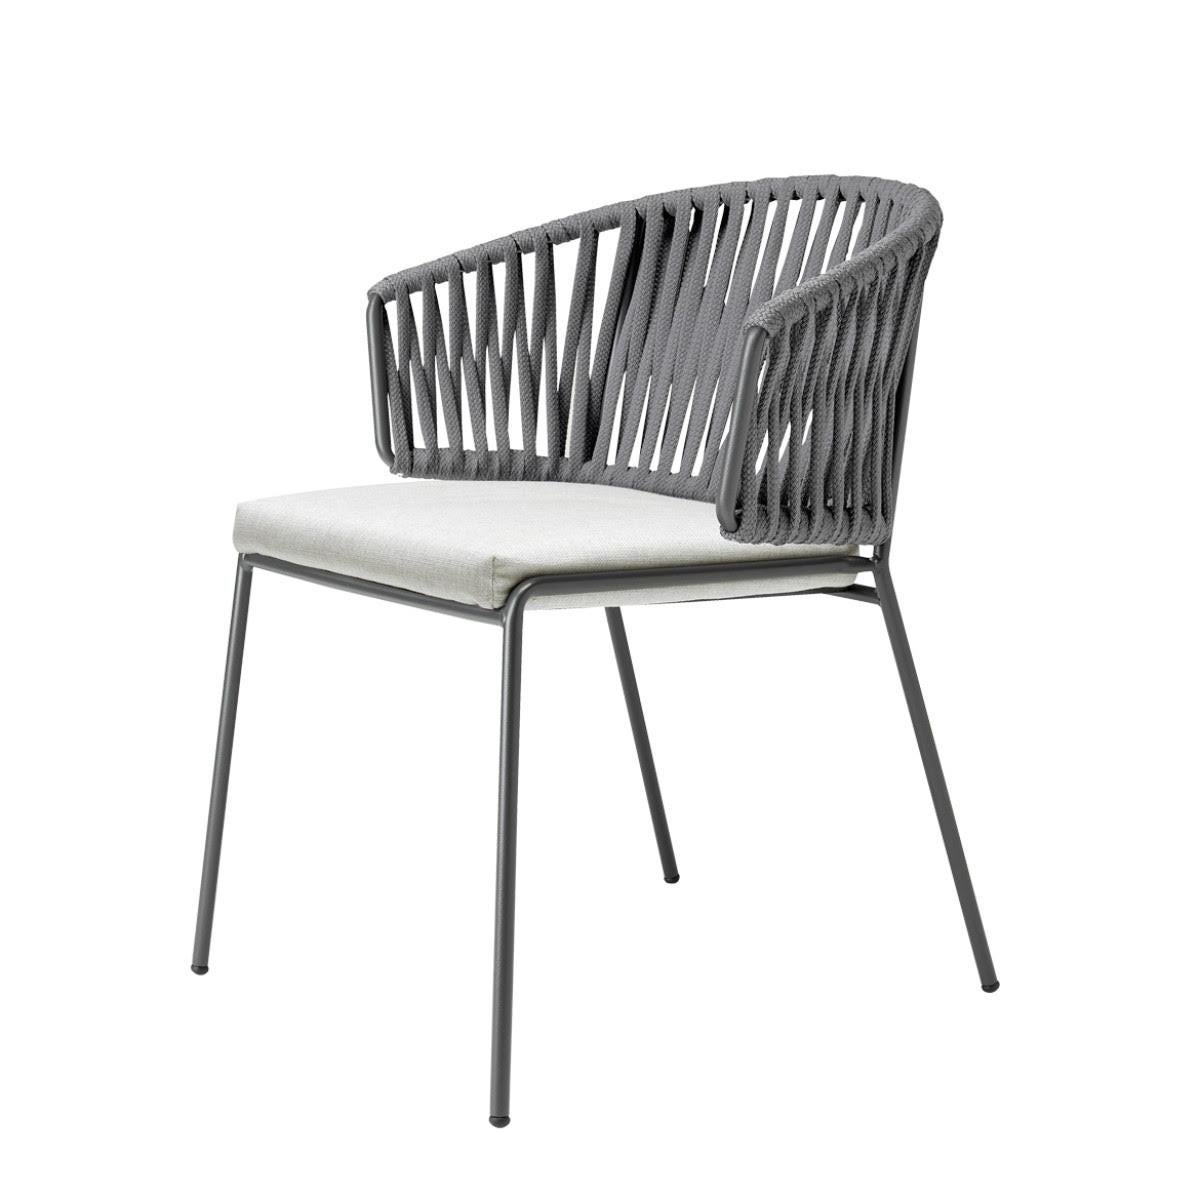 Pair of Grey Outdoor or Indoor Metal and Cord Armchairs, 21 century
Modern production armchair for outdoors or indoors. The structure is in metal and reinforced by the ropes on the back. This armchair has an innovative, modern and fresh design.
The